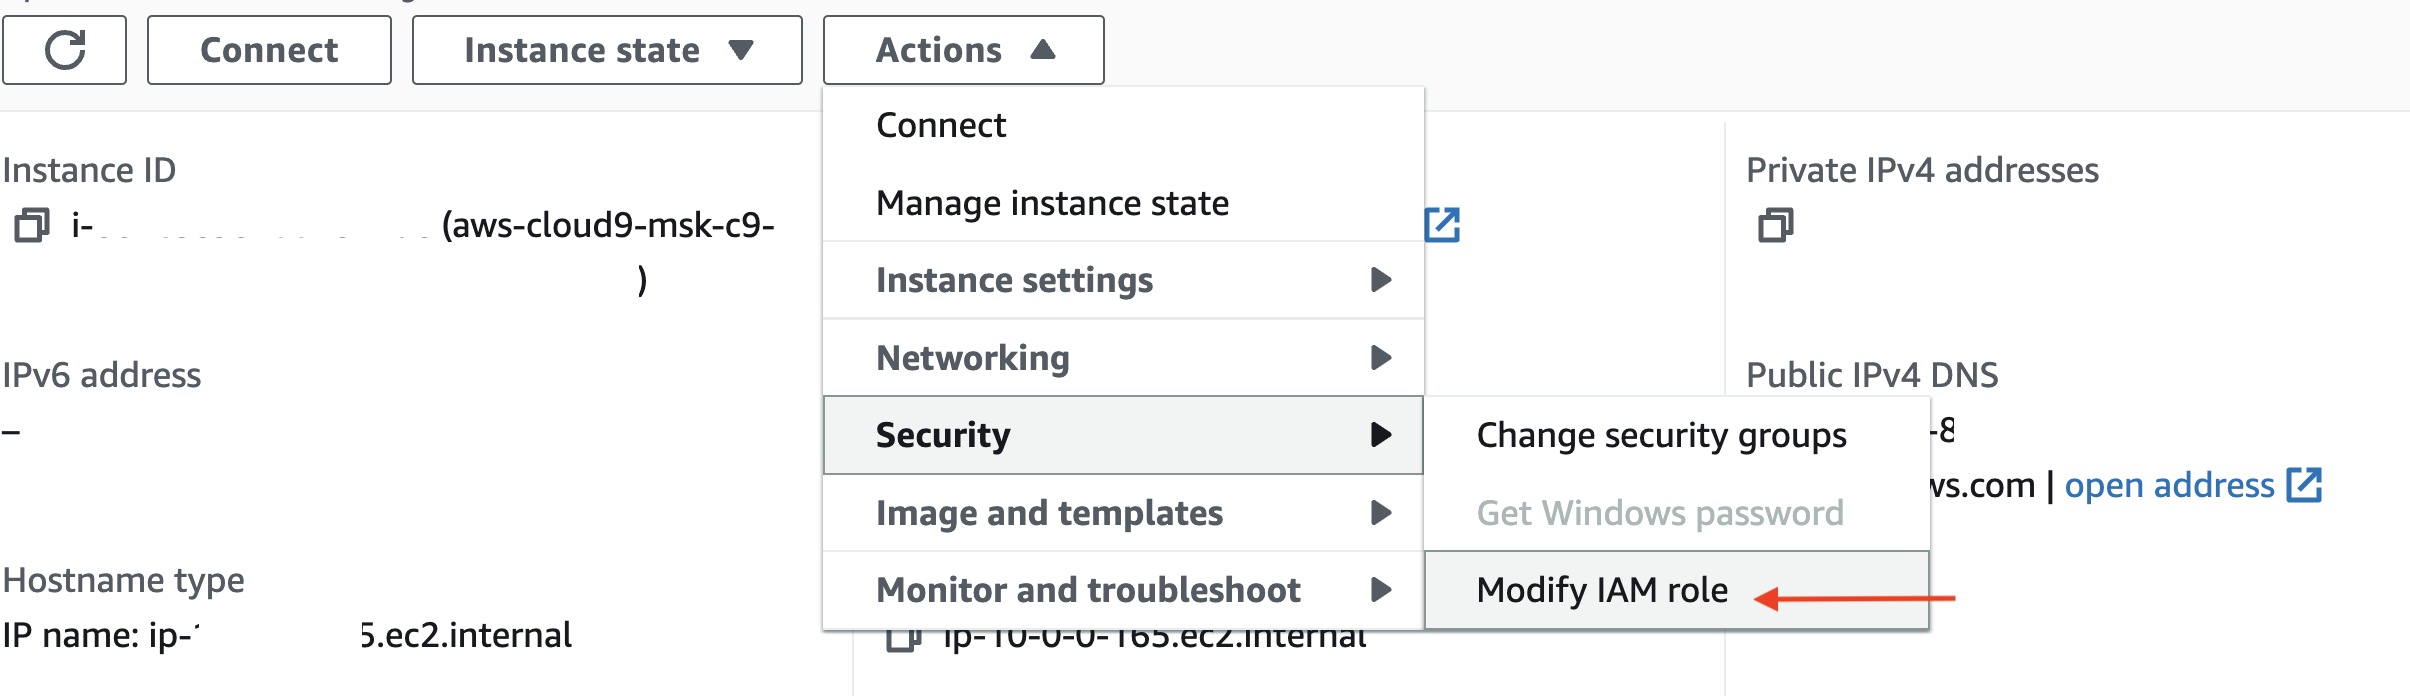 Attach the IAM role to the Cloud9 EC2 instance